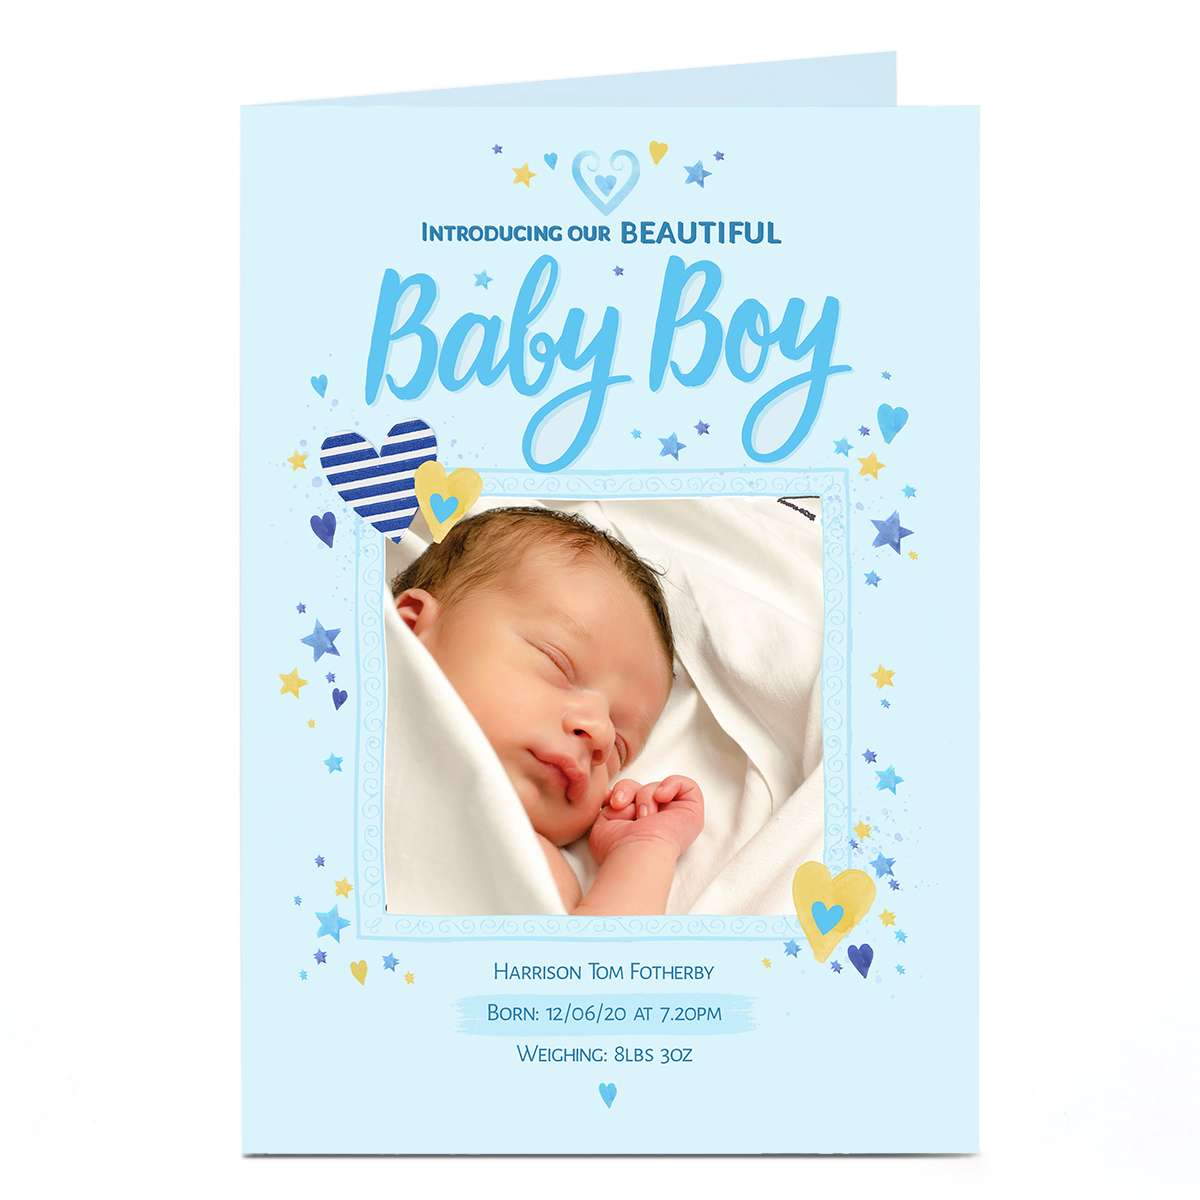 Photo New Baby Announcement Card - Beautiful Boy